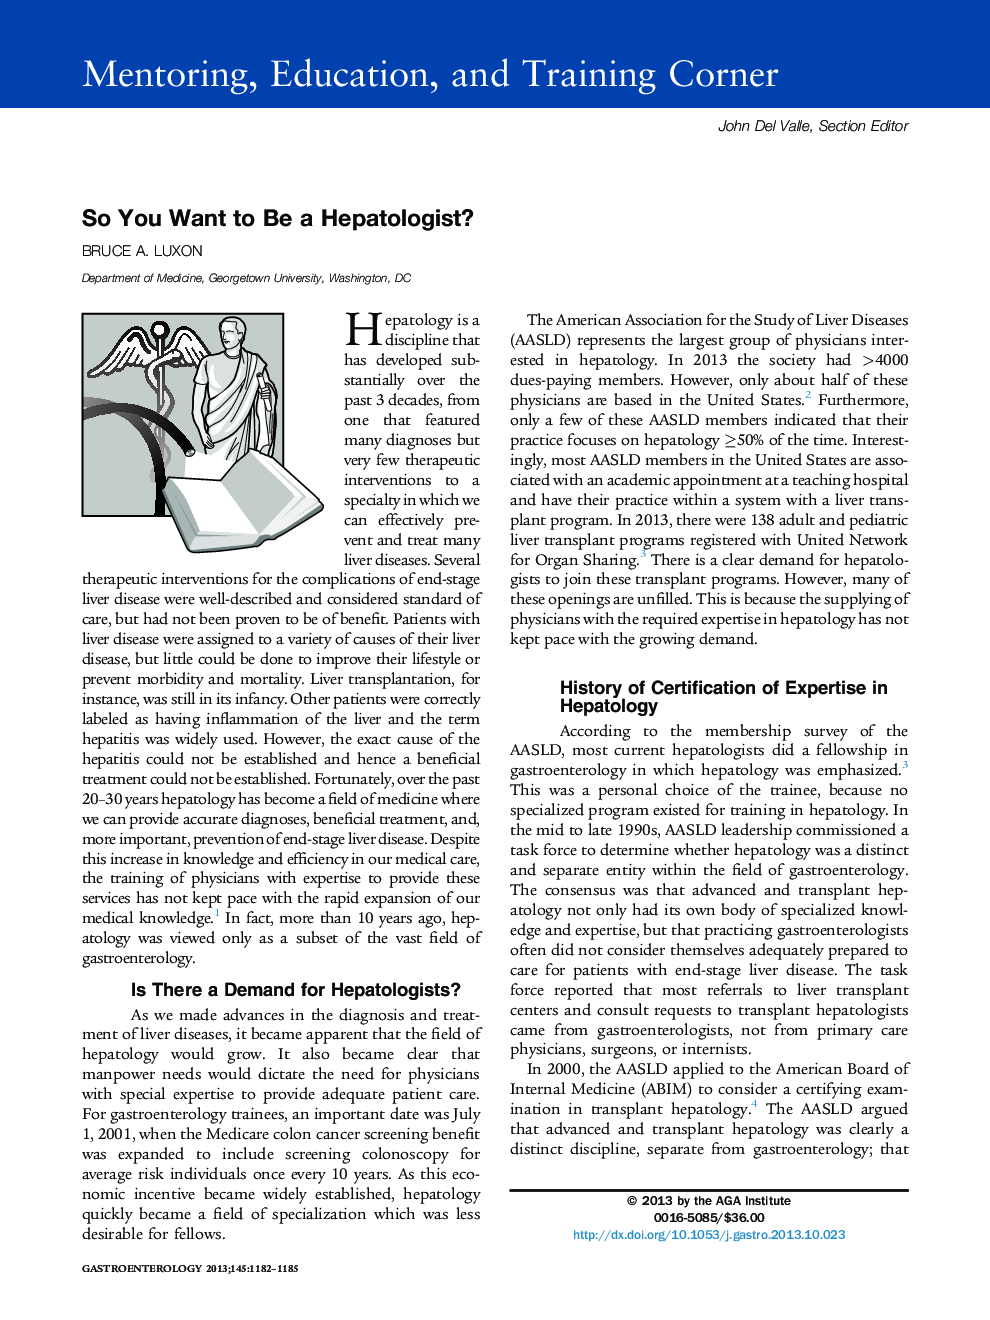 So You Want to Be a Hepatologist?